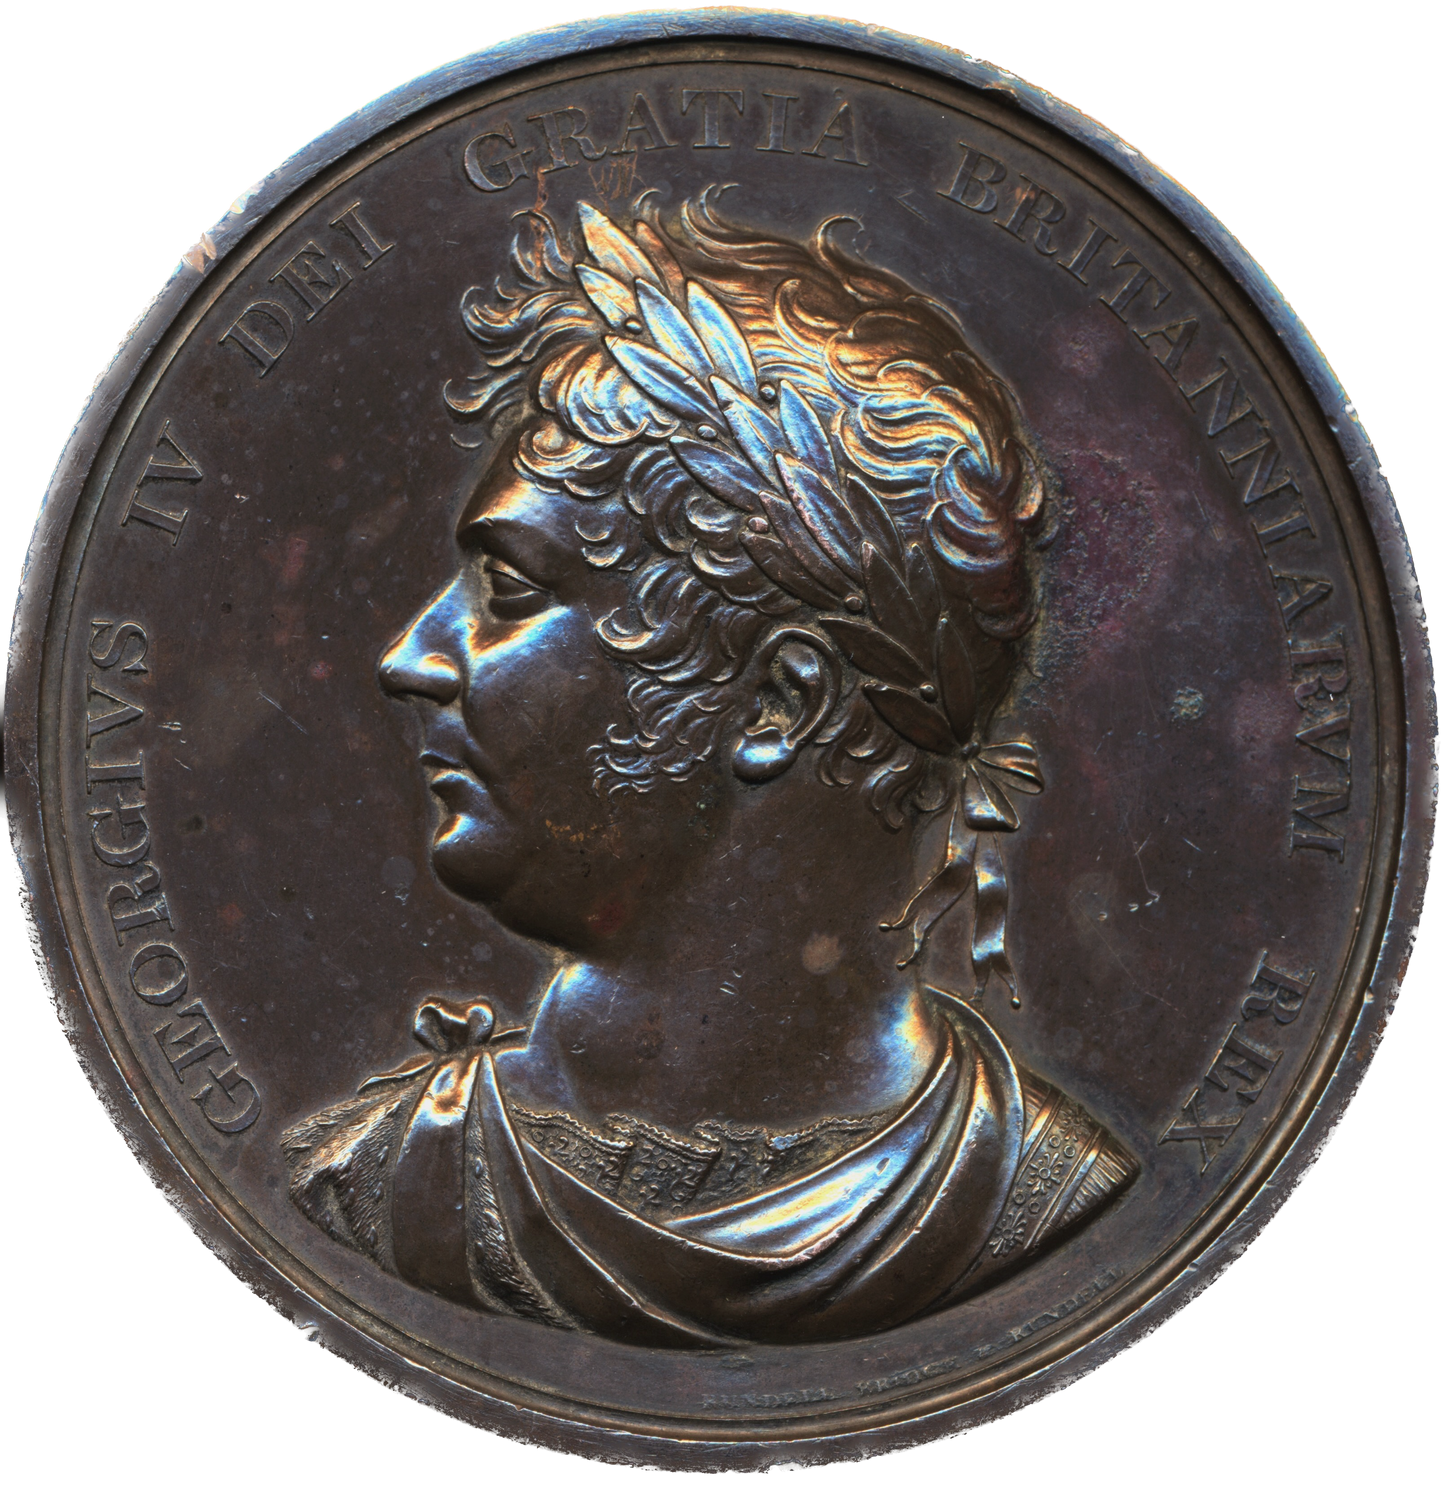 1820 Accession of George IV 70mm bronze medal E1123a BHM 1010 GVF